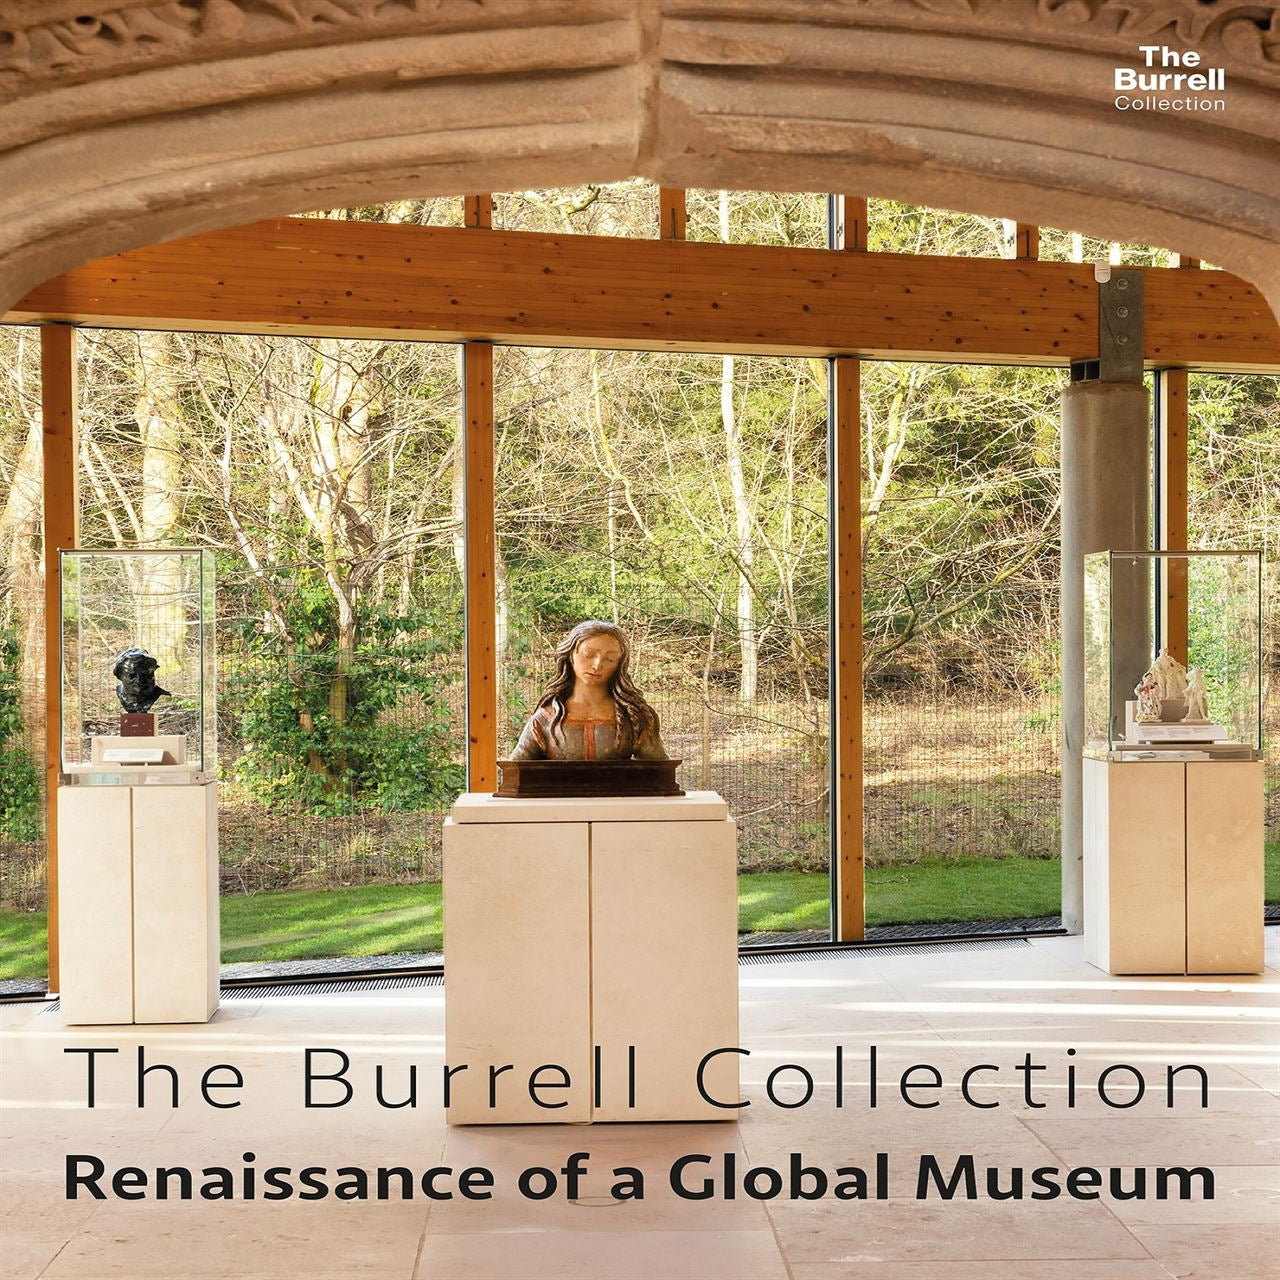 The Burrell Collection: Renaissance of a Global Museum